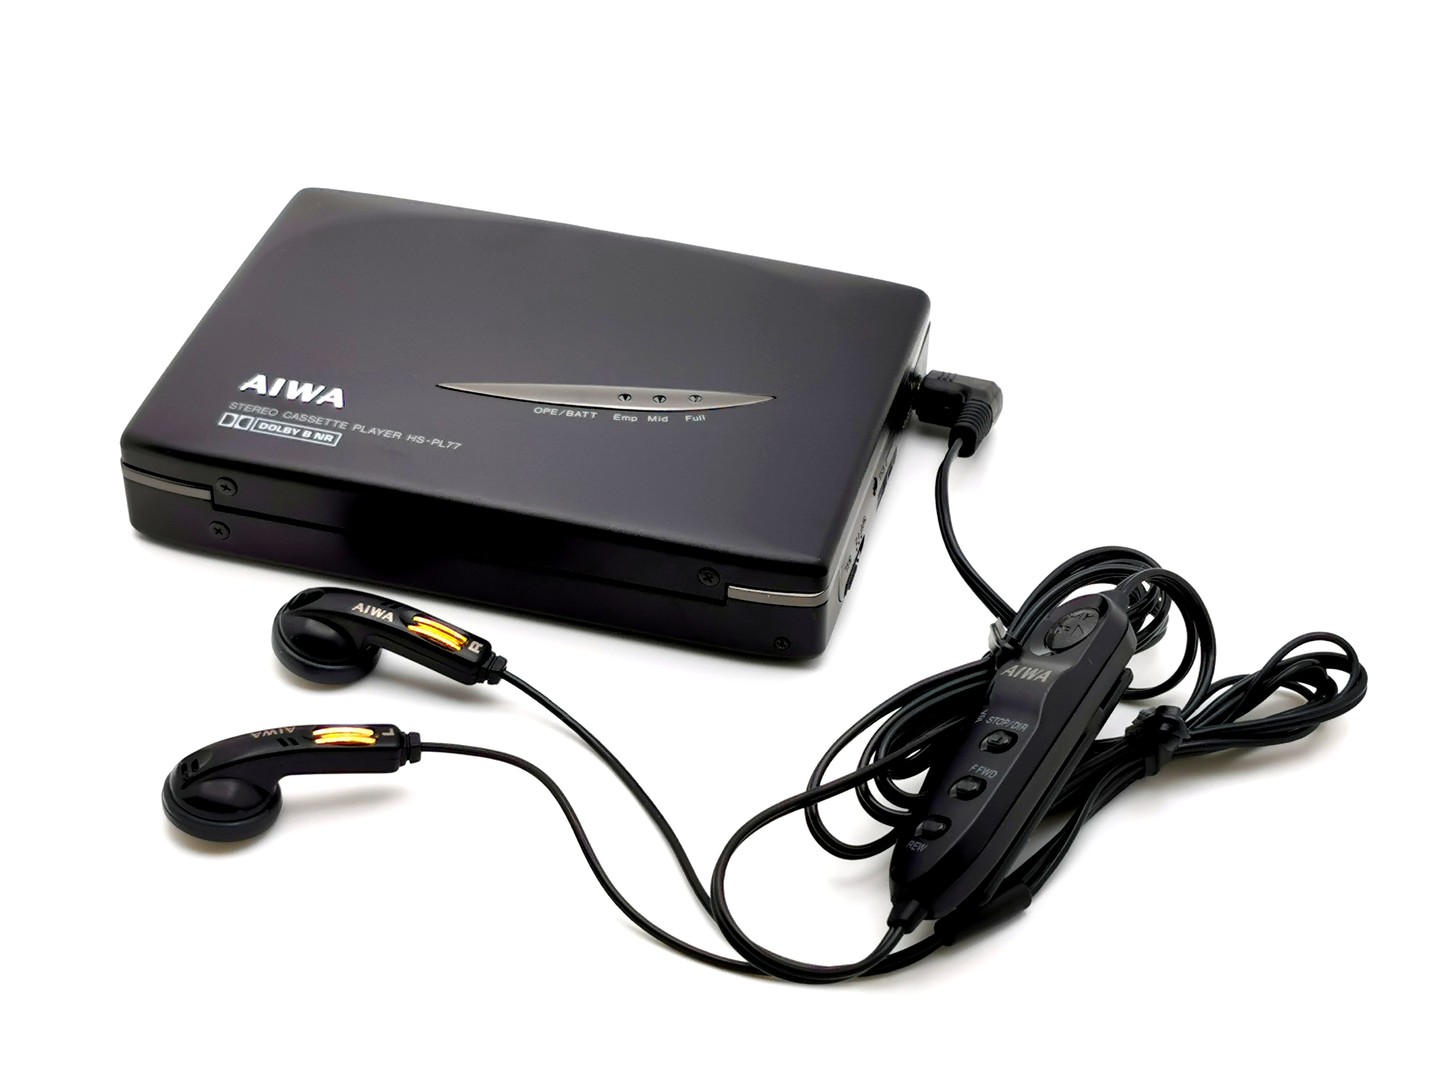 Aiwa_HS-PL77_-_Unit_with_headphone_and_inline_remote_ig-boxedwalkman